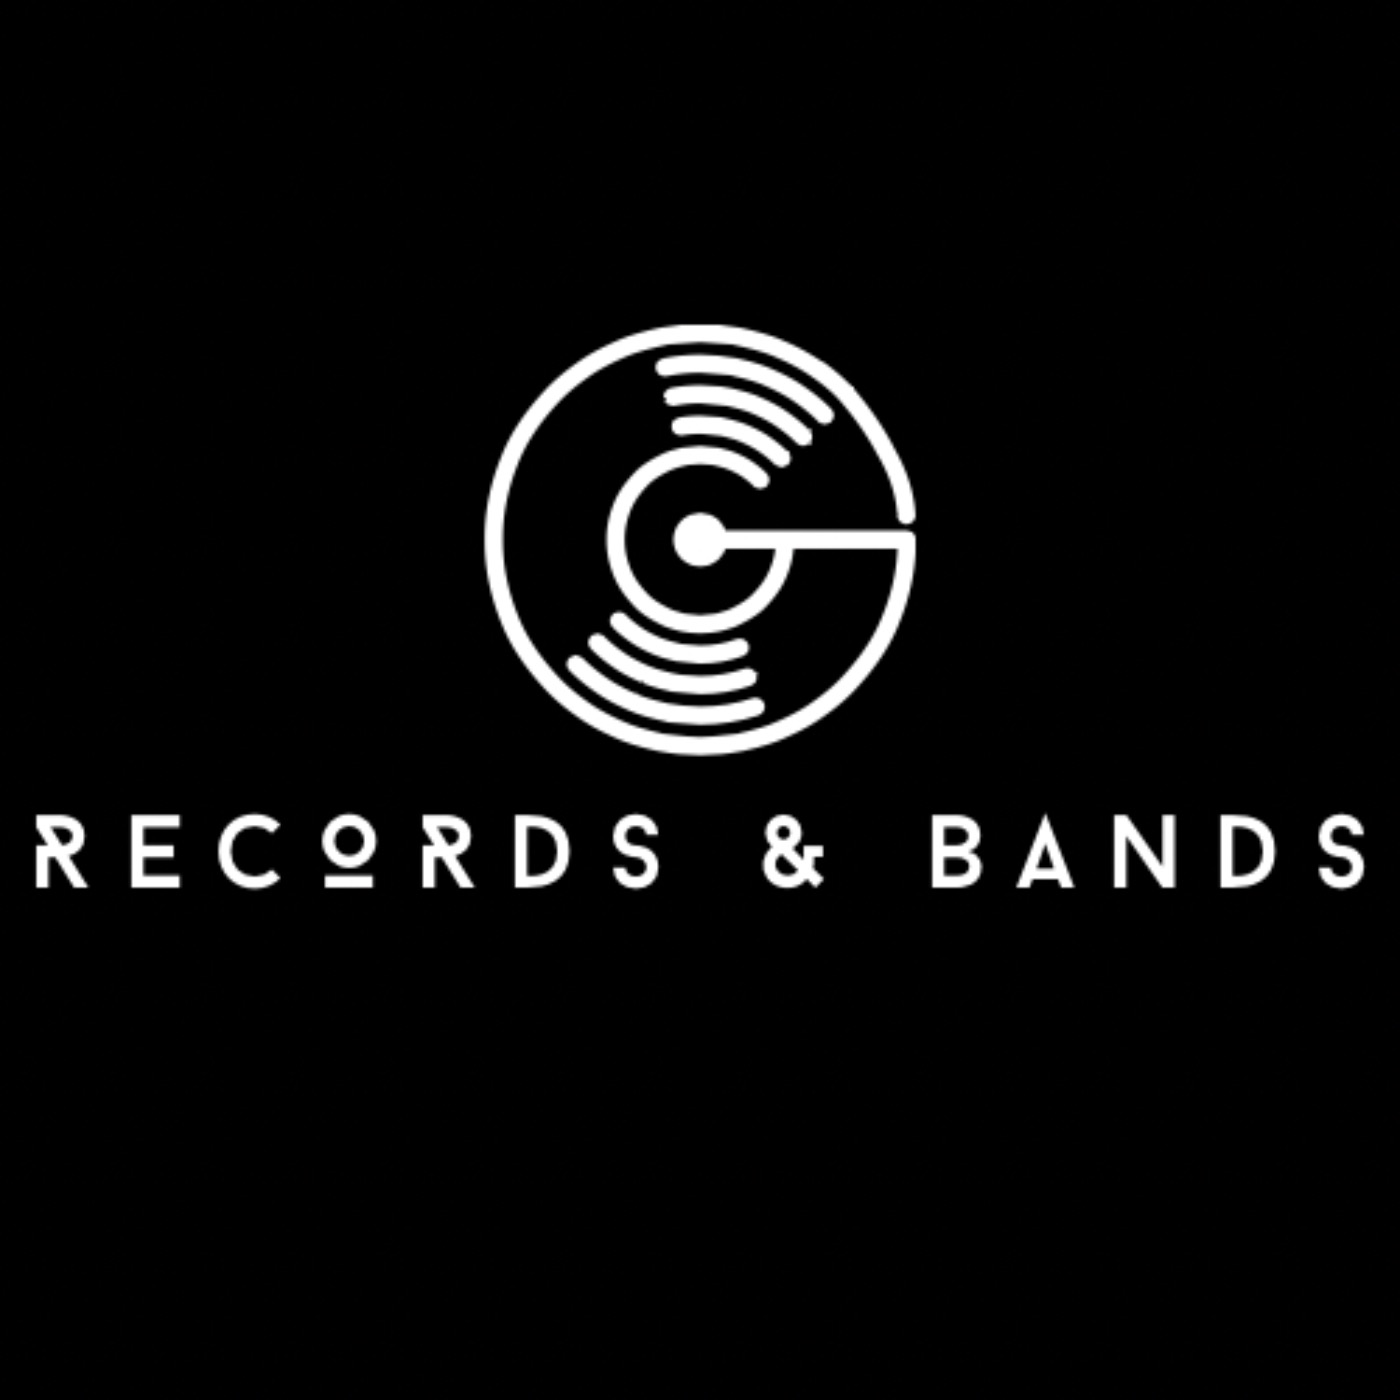 Records & Bands